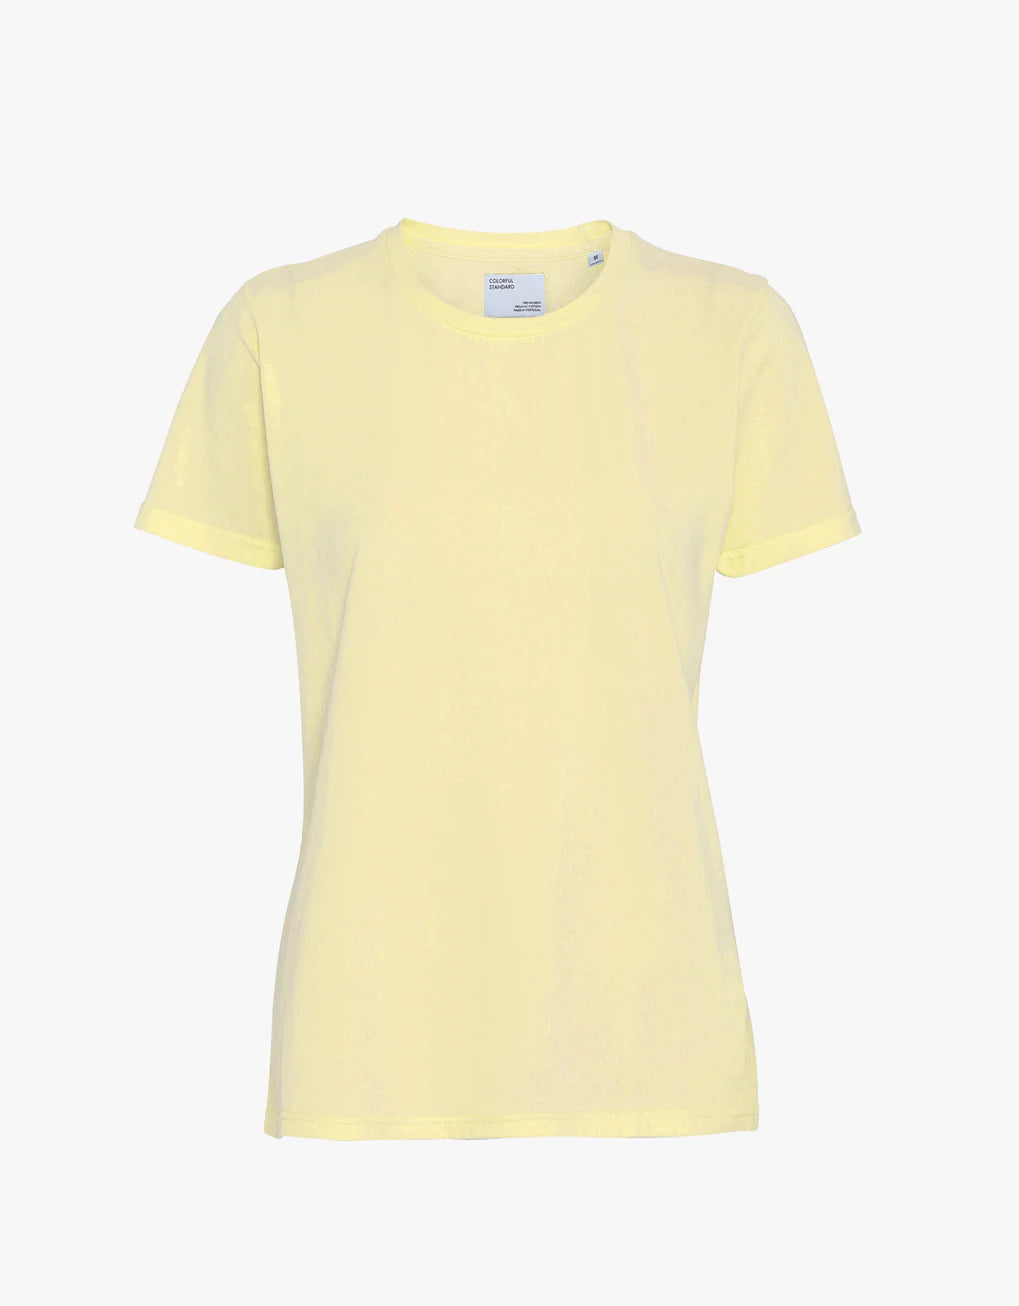 A Light Organic Tee made by Colorful Standard on a white background.